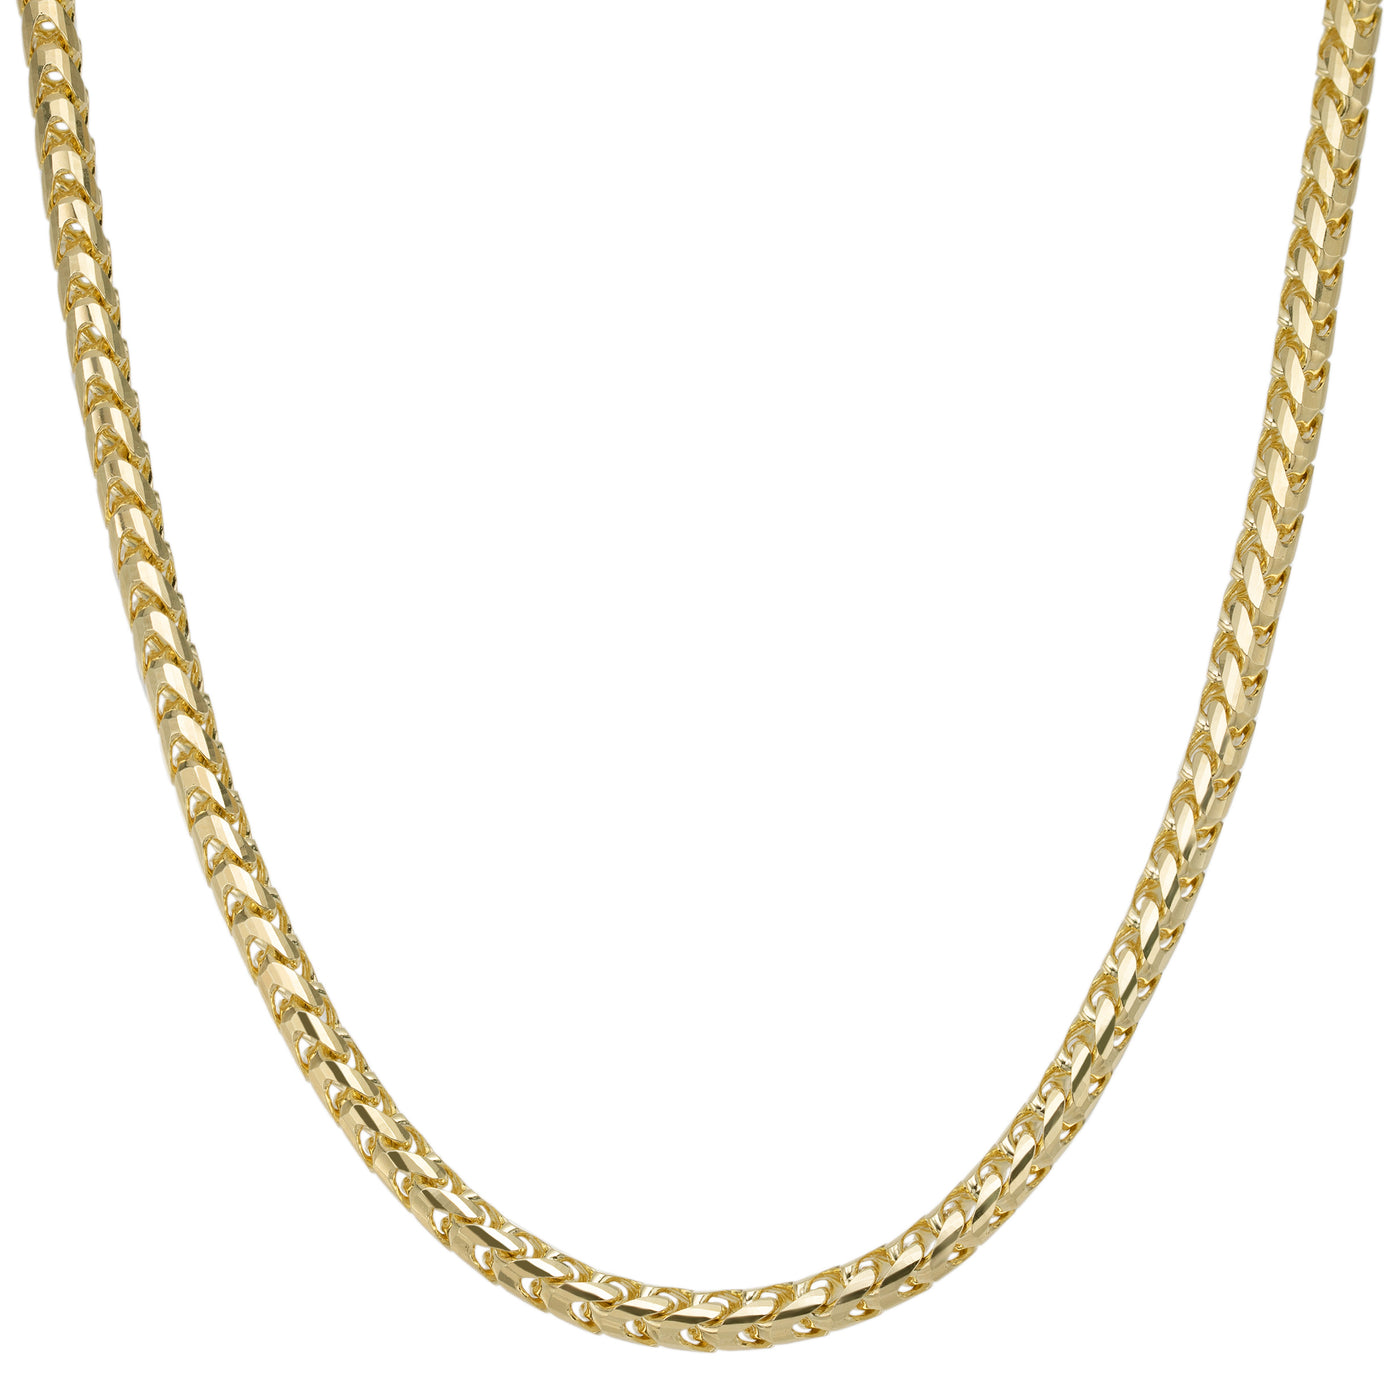 Franco Chain Necklace 14K Yellow Gold - Solid